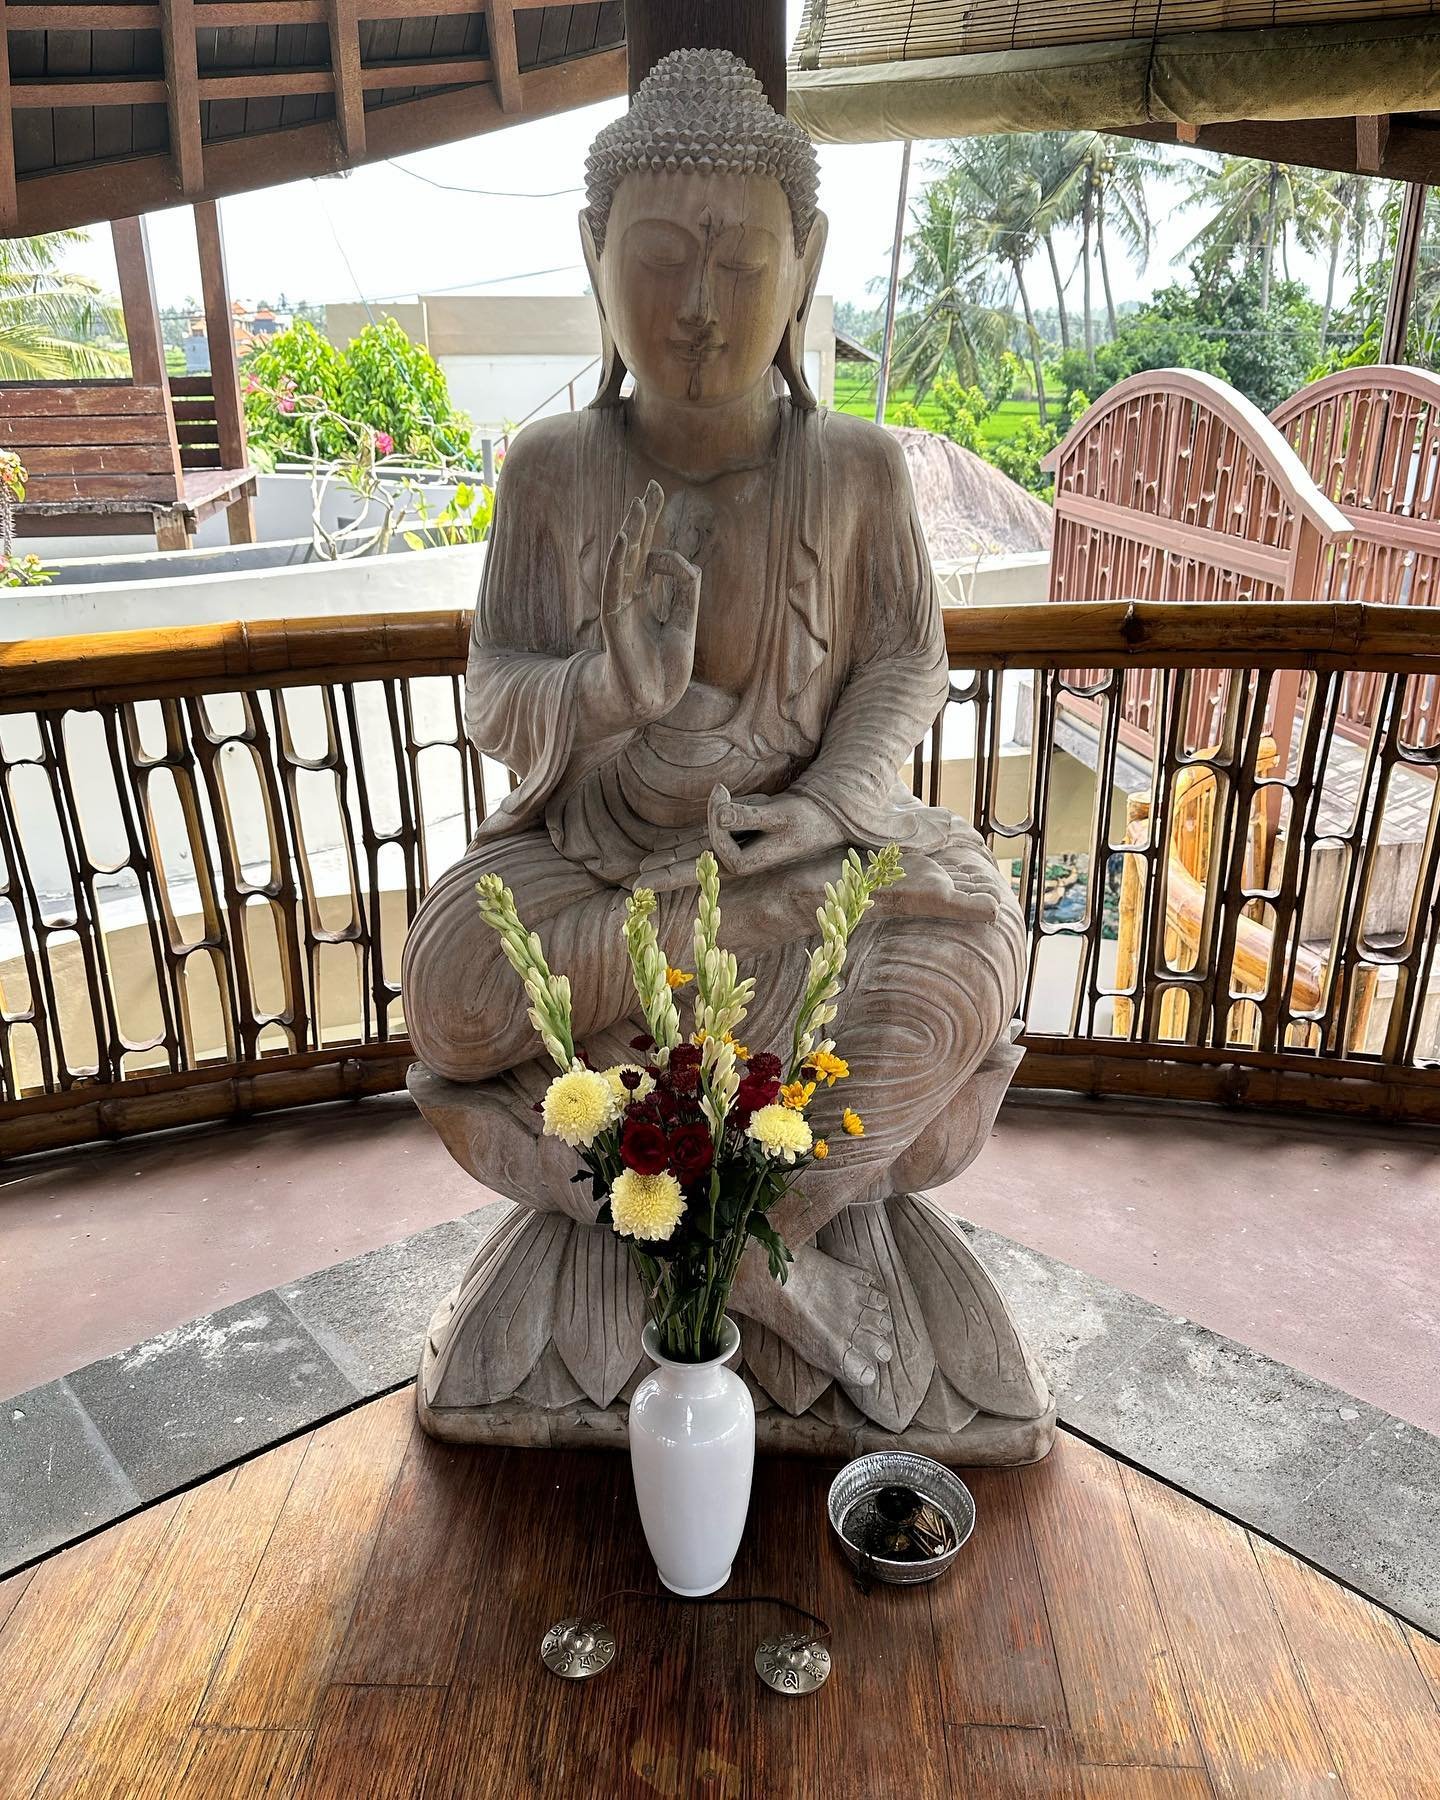 What a sweet trip of miracle and wonders! 🌟 

Bali. I had not visited her shore for 13 years. Over 20 years ago I ran an import business from Bali, so am familiar with her sacred quality. I have made baby trips over the years here, but it&rsquo;s be